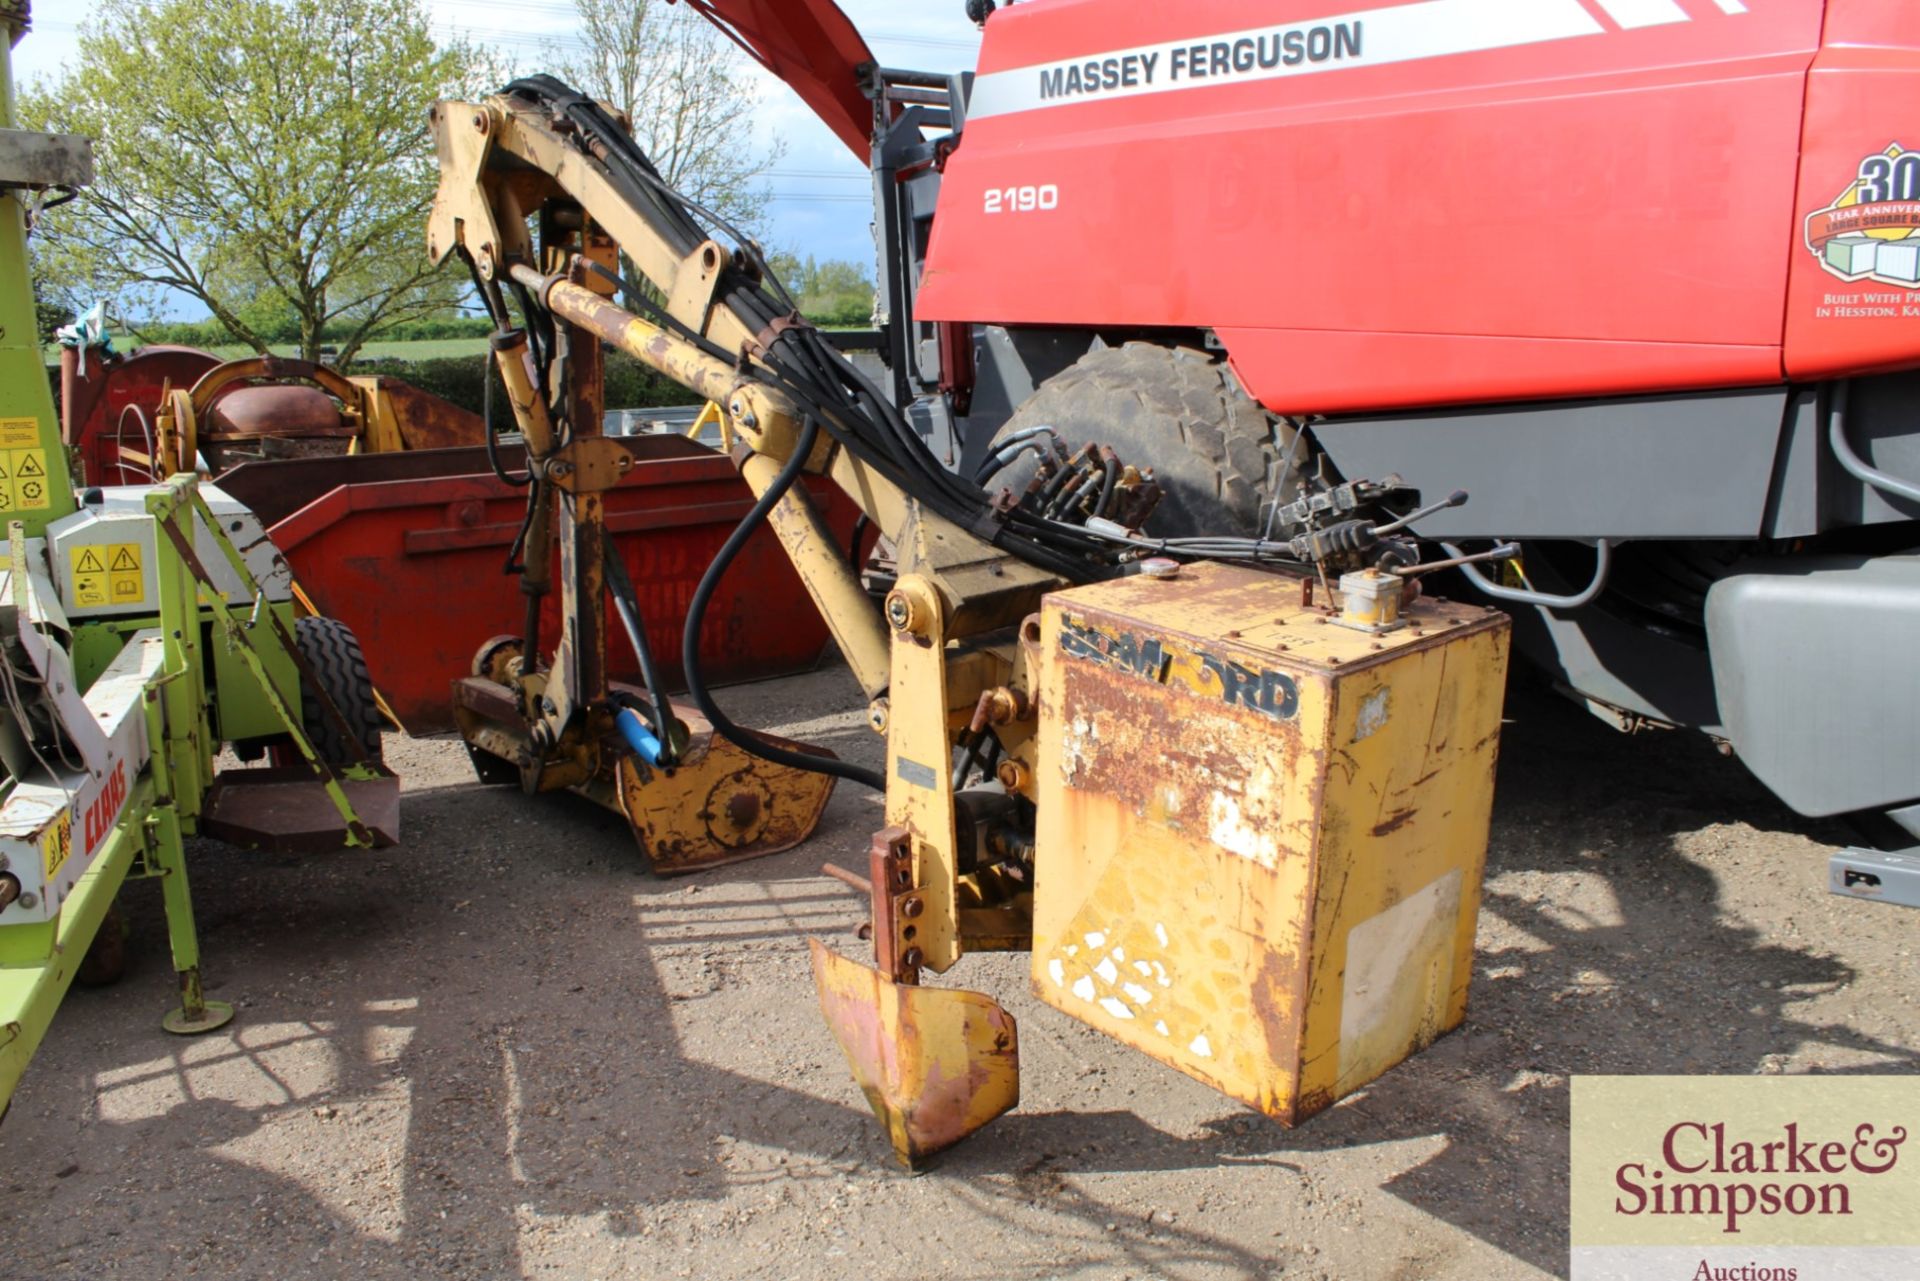 Bomford Supertrim linkage conversion hedge cutter. Serial number 3890.